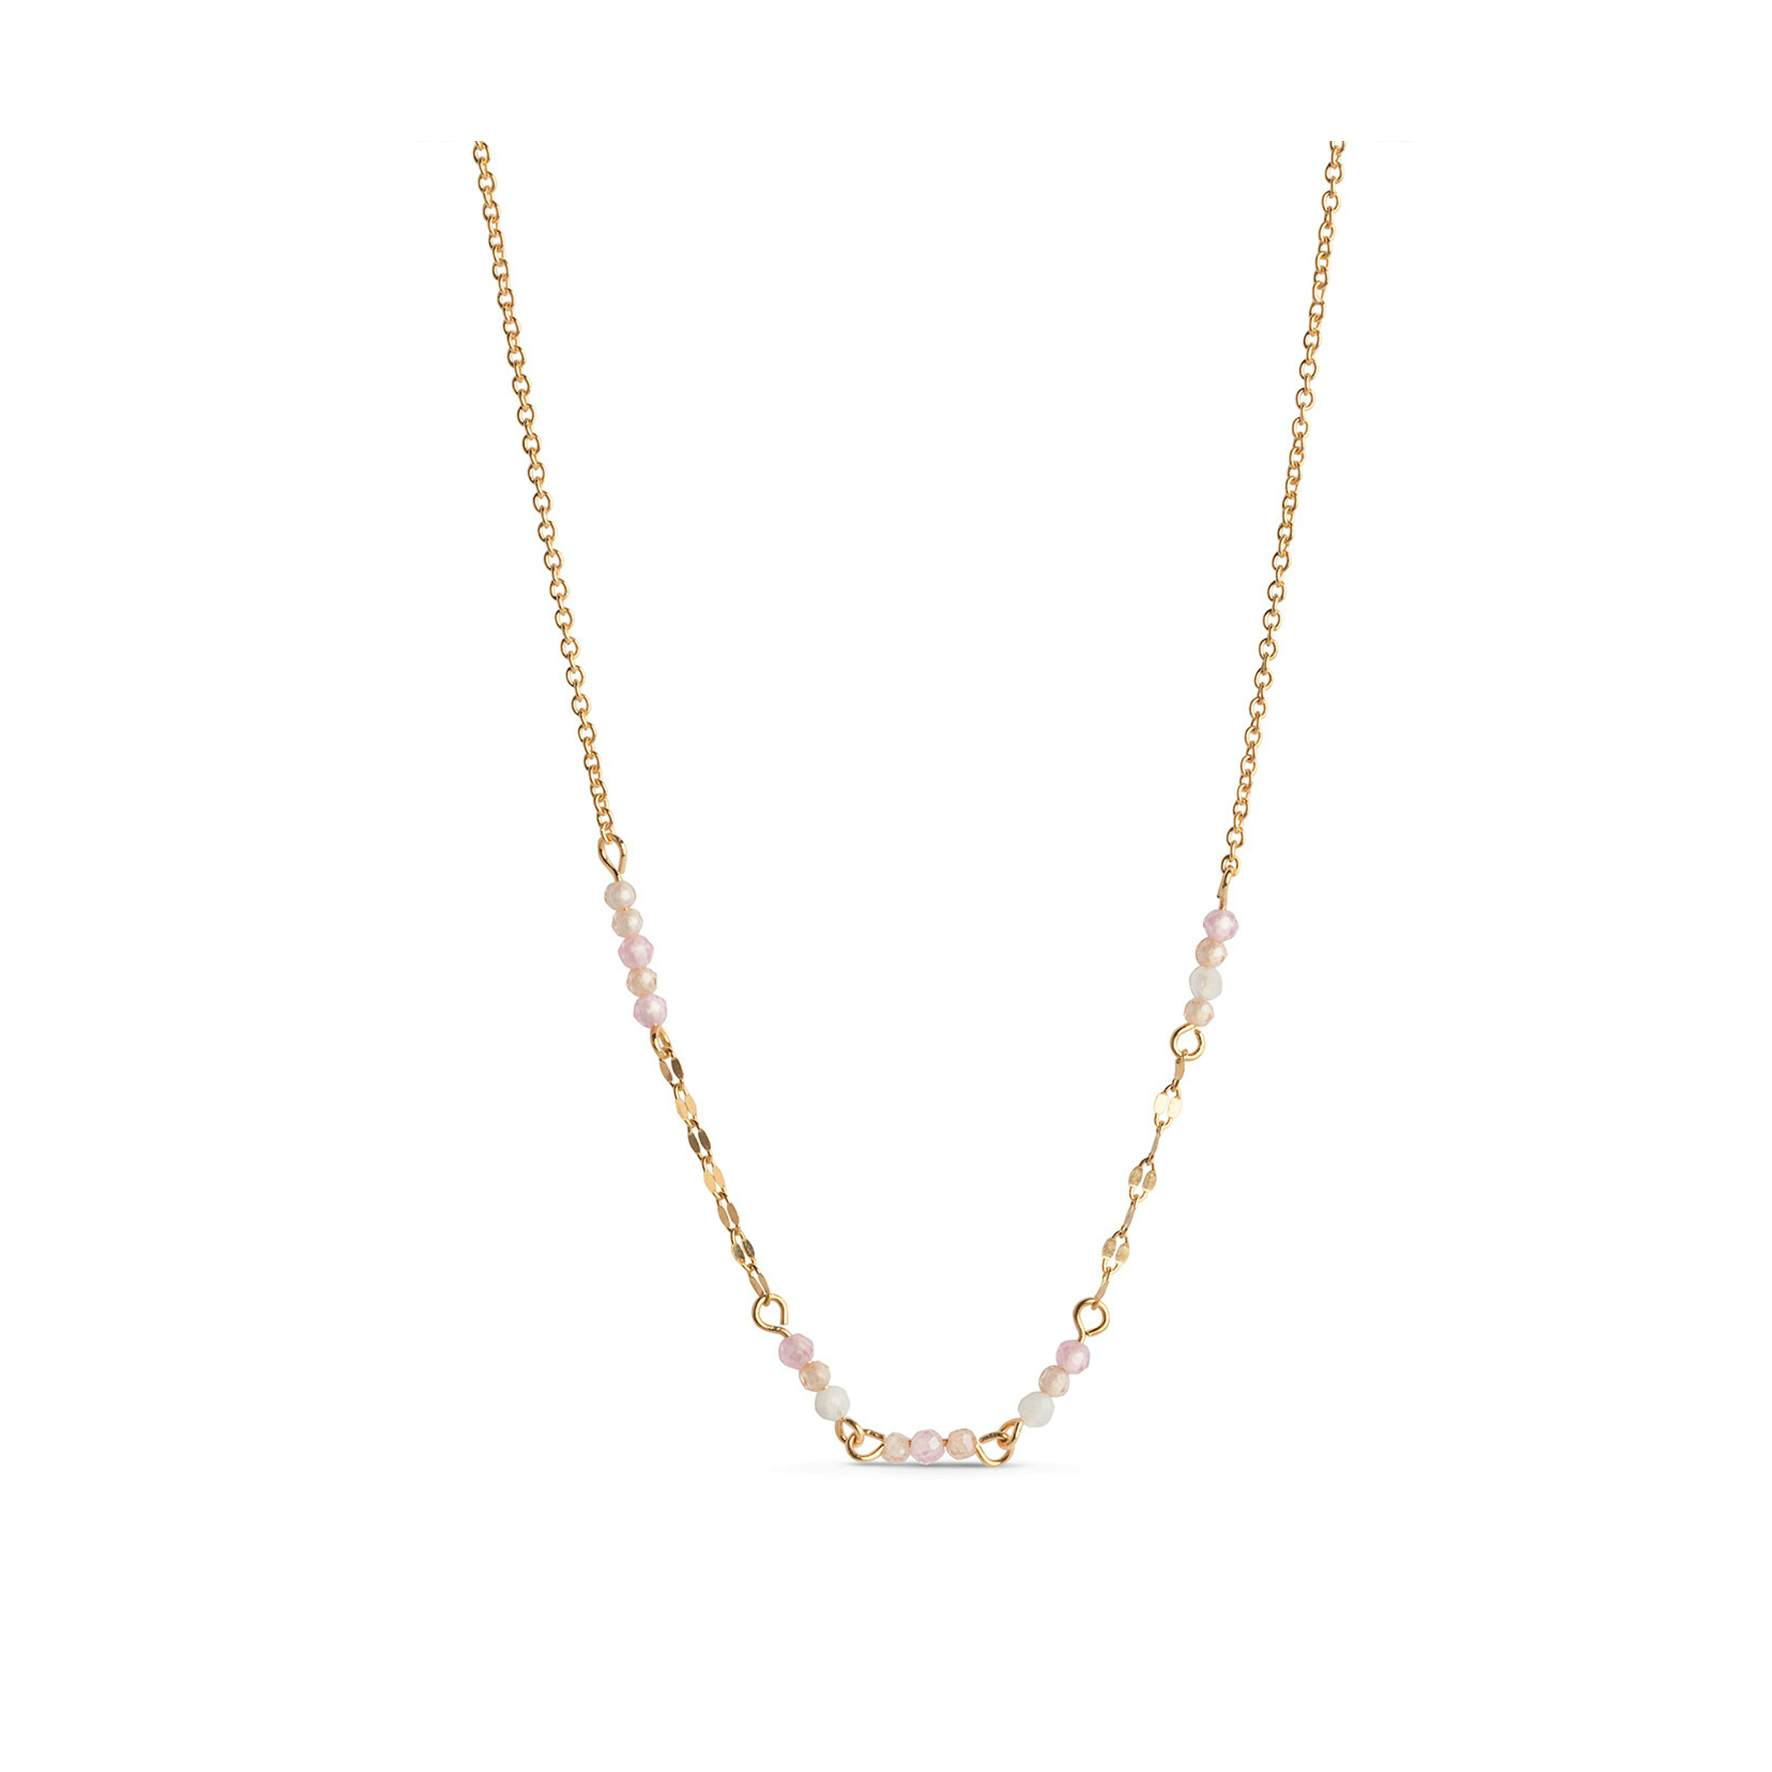 Claire Necklace from Enamel Copenhagen in Goldplated-Silver Sterling 925